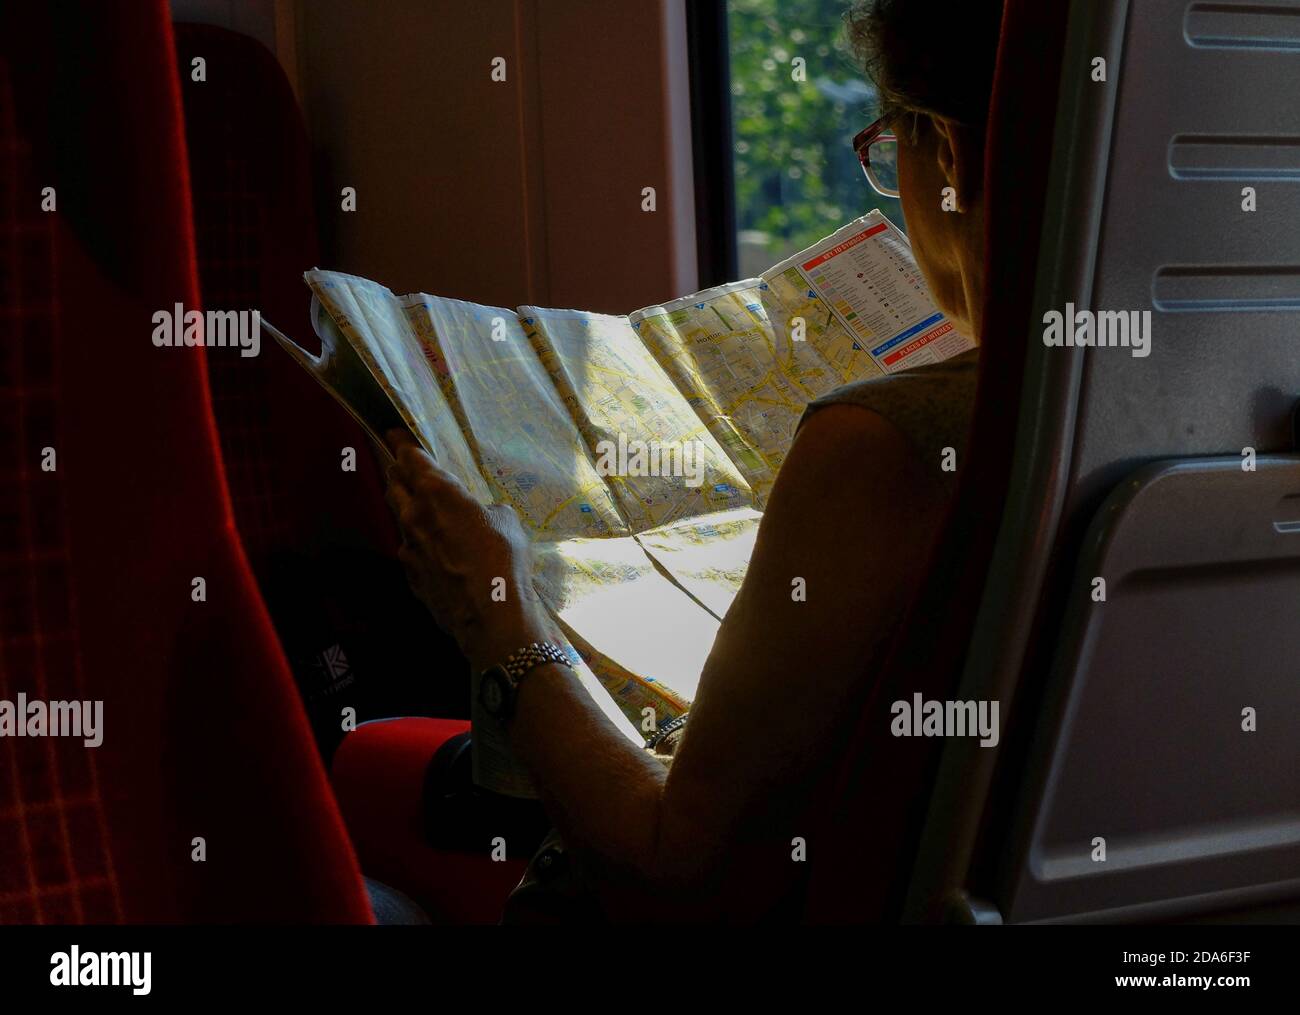 A passenger on a train between Poole and London Waterloo reads a large A to Z tourist map of central London featuring Clerkenwell and Hoxton during the two hour commuter journey from Dorset via Bournemouth and Southamptoonb to the capital city of the United Kingdom. 23 July 2014. Photo: Neil Turner Stock Photo